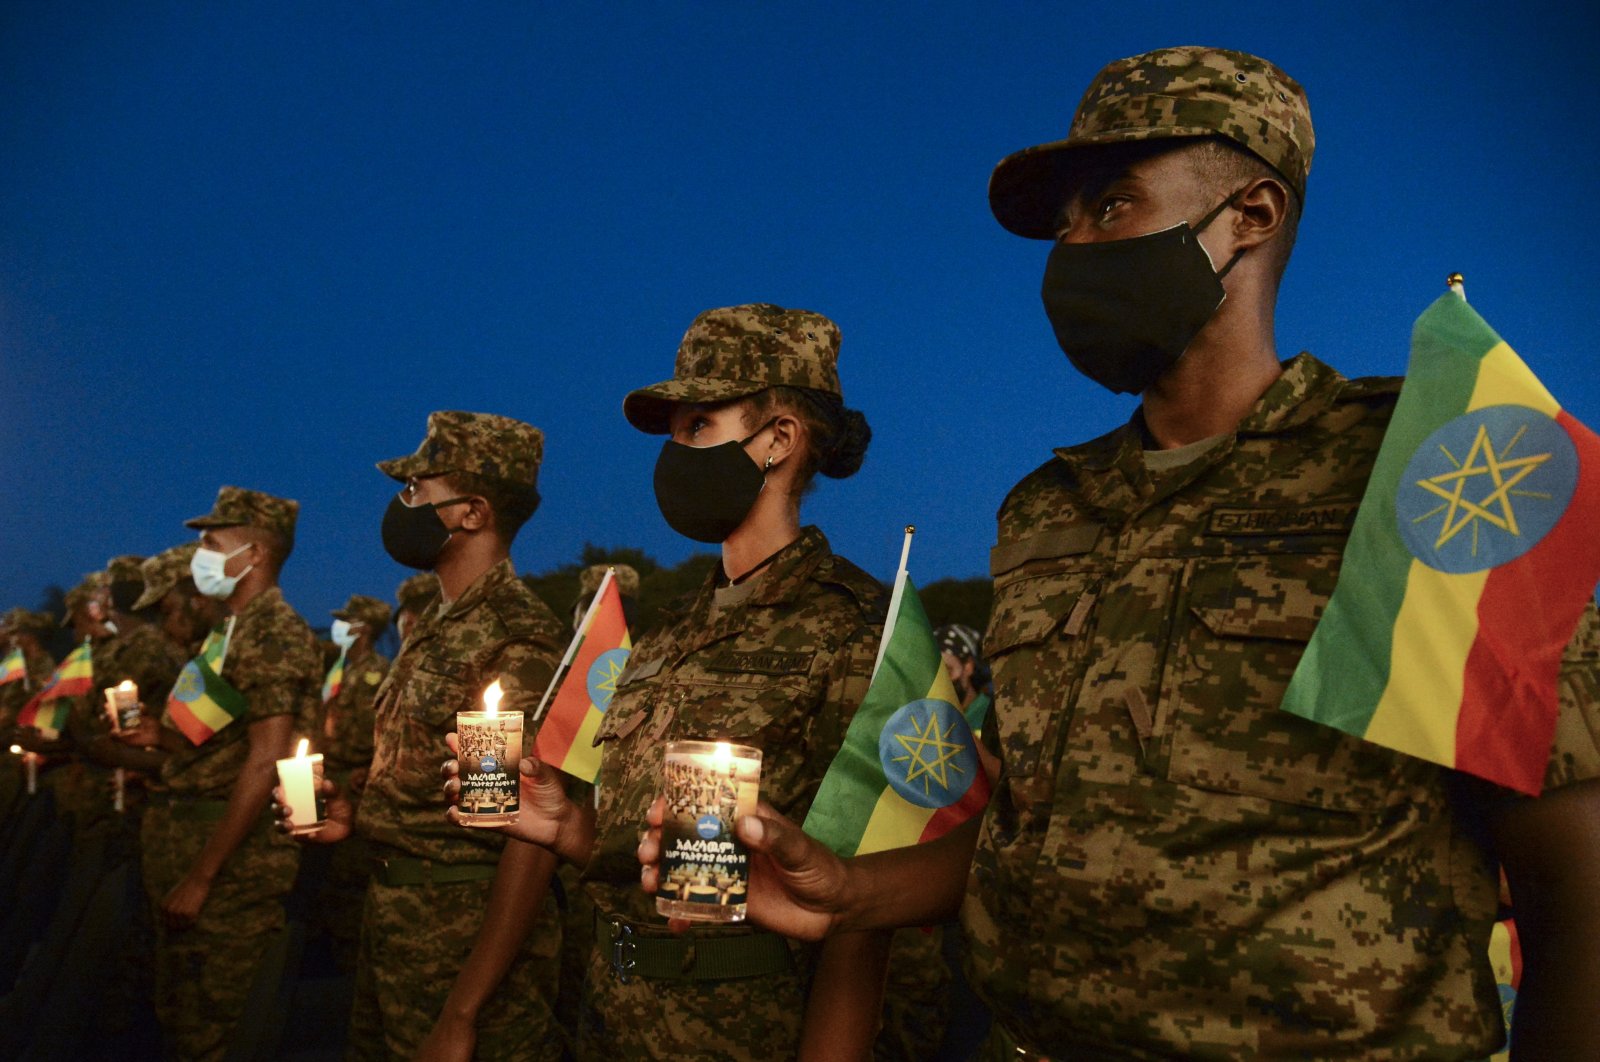 Current and former Ethiopian military personnel and the public commemorate federal soldiers killed by forces loyal to the Tigray People's Liberation Front (TPLF) at the start of the conflict one year ago, at a candlelit event outside the city administration in Addis Ababa, Ethiopia, Nov. 3, 2021. (AP Photo)